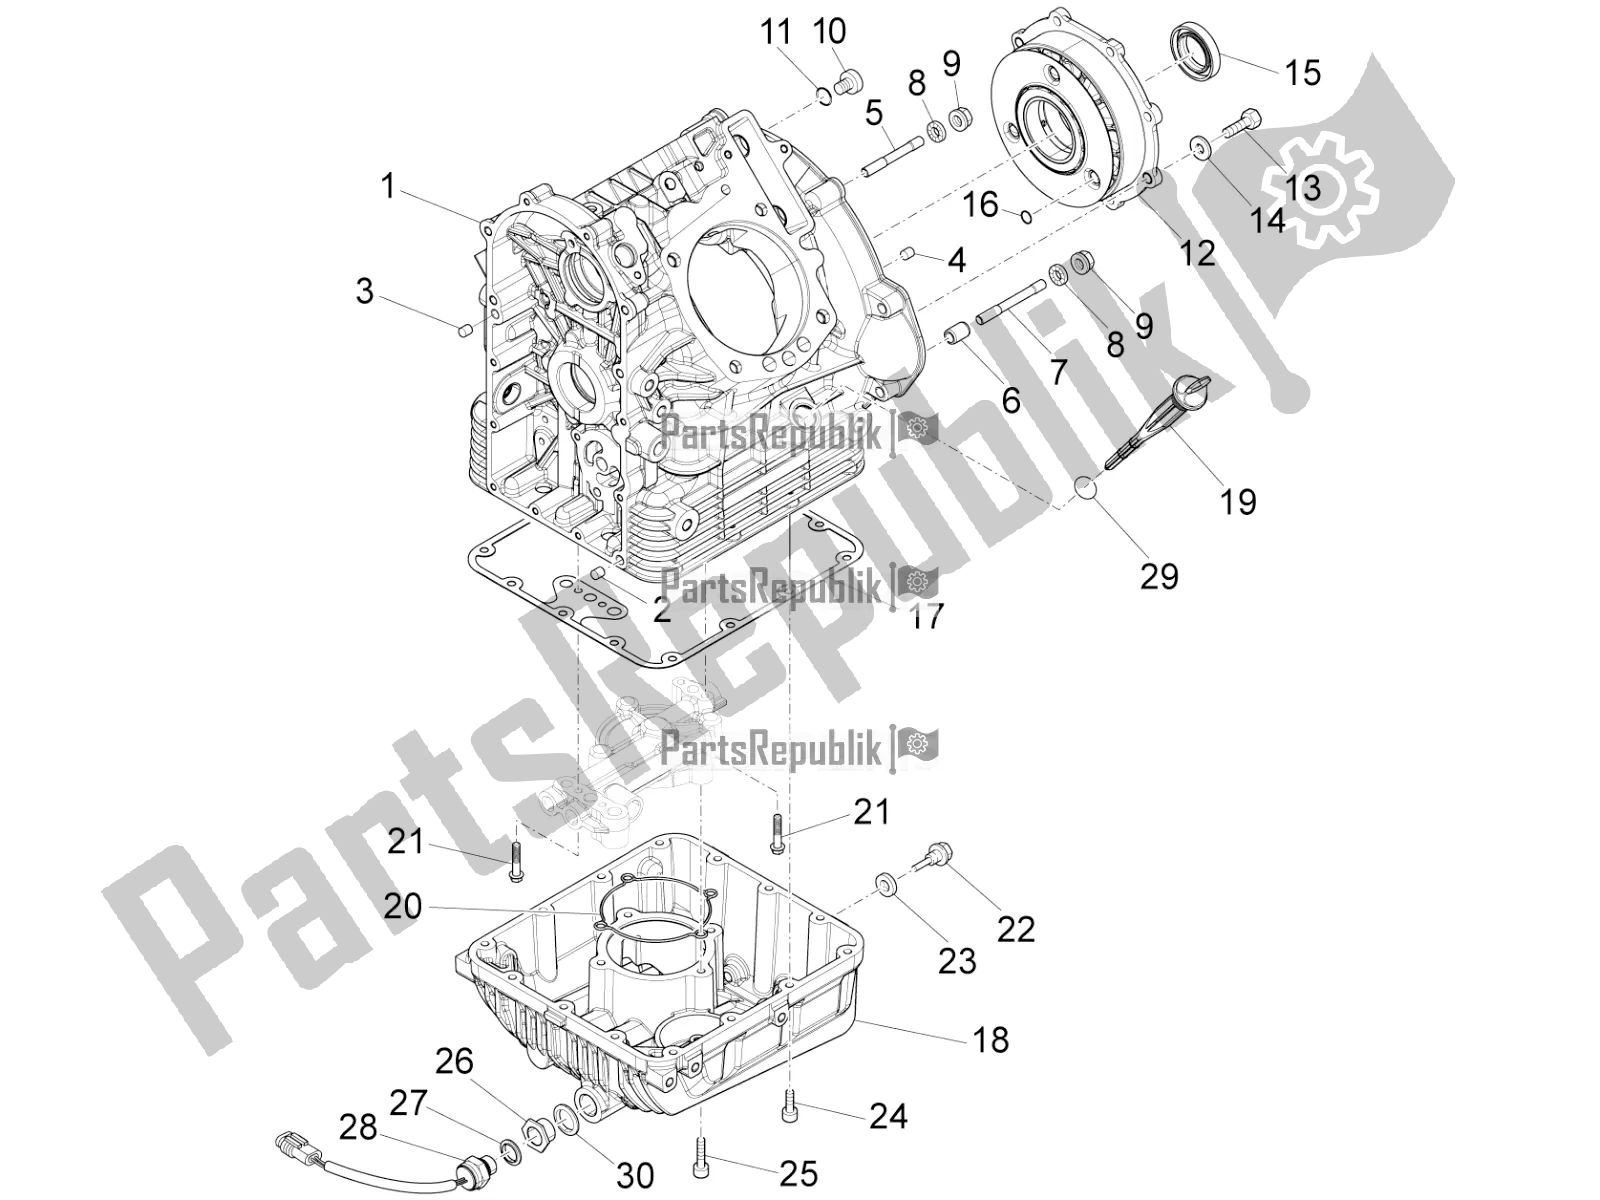 All parts for the Crankcases I of the Moto-Guzzi Audace 1400 ABS 2017